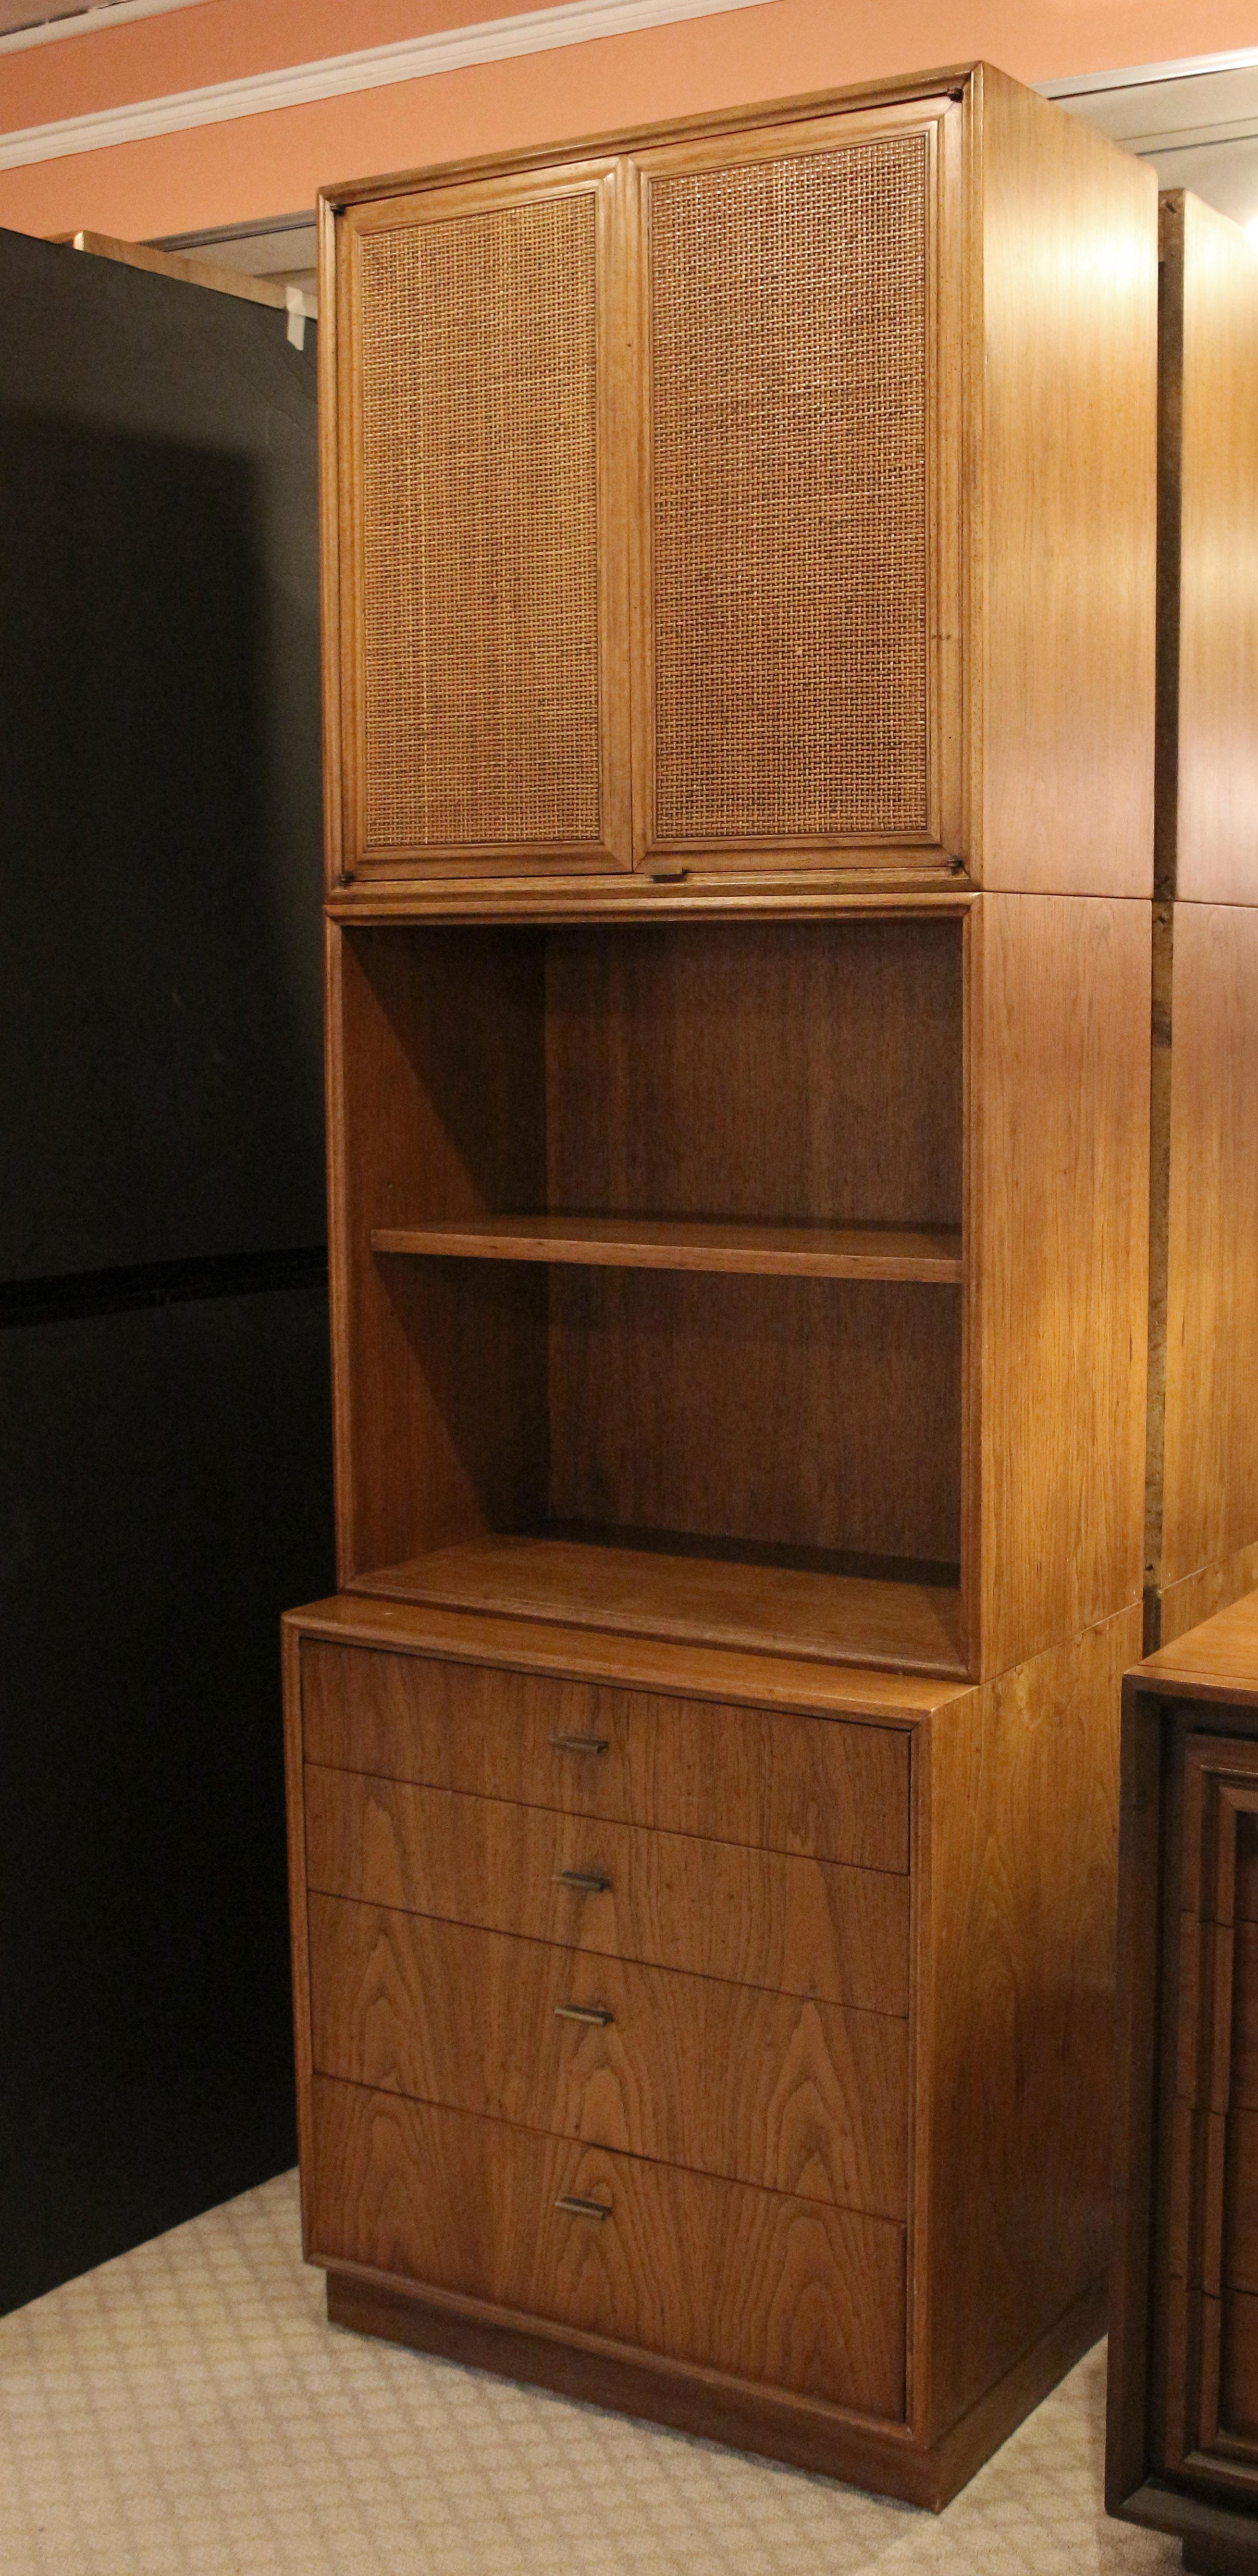 A significant quality c. 1960's mid-century modern three part cabinet on bookcase on chest paired on a plinth base. Made by Founders of solid pecan with cane panels and fine brass pulls, it was designed by Jack Cartwright. While not branded, it is